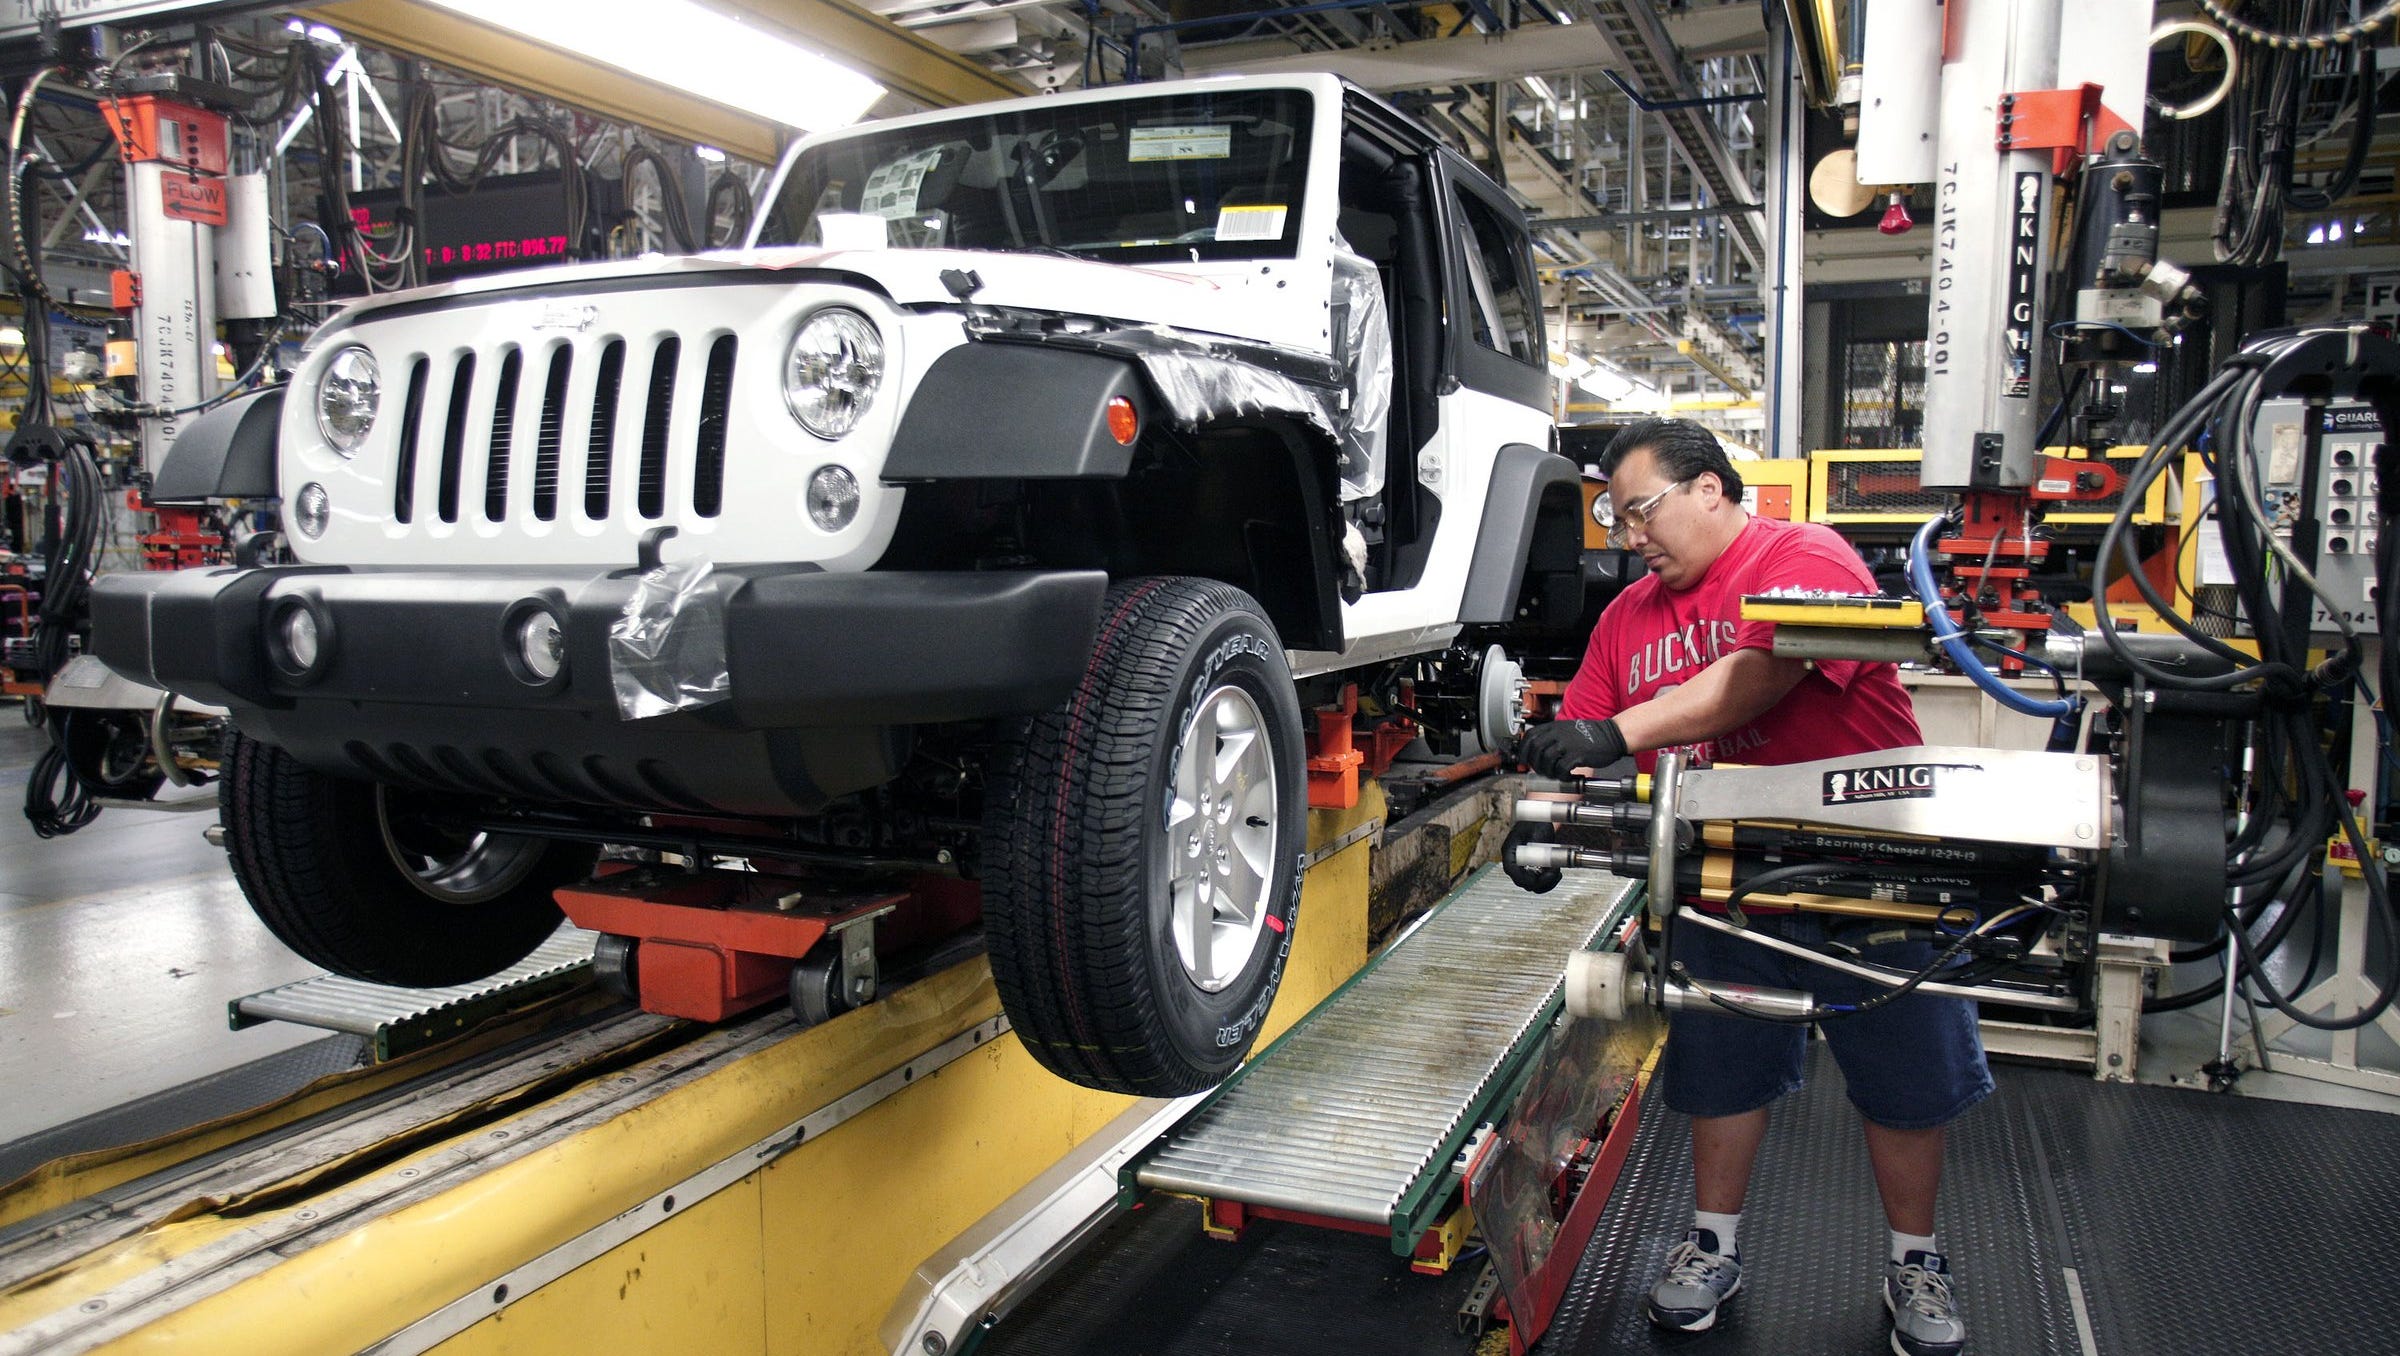 Prospects for next Wrangler to be built in Toledo looking brighter